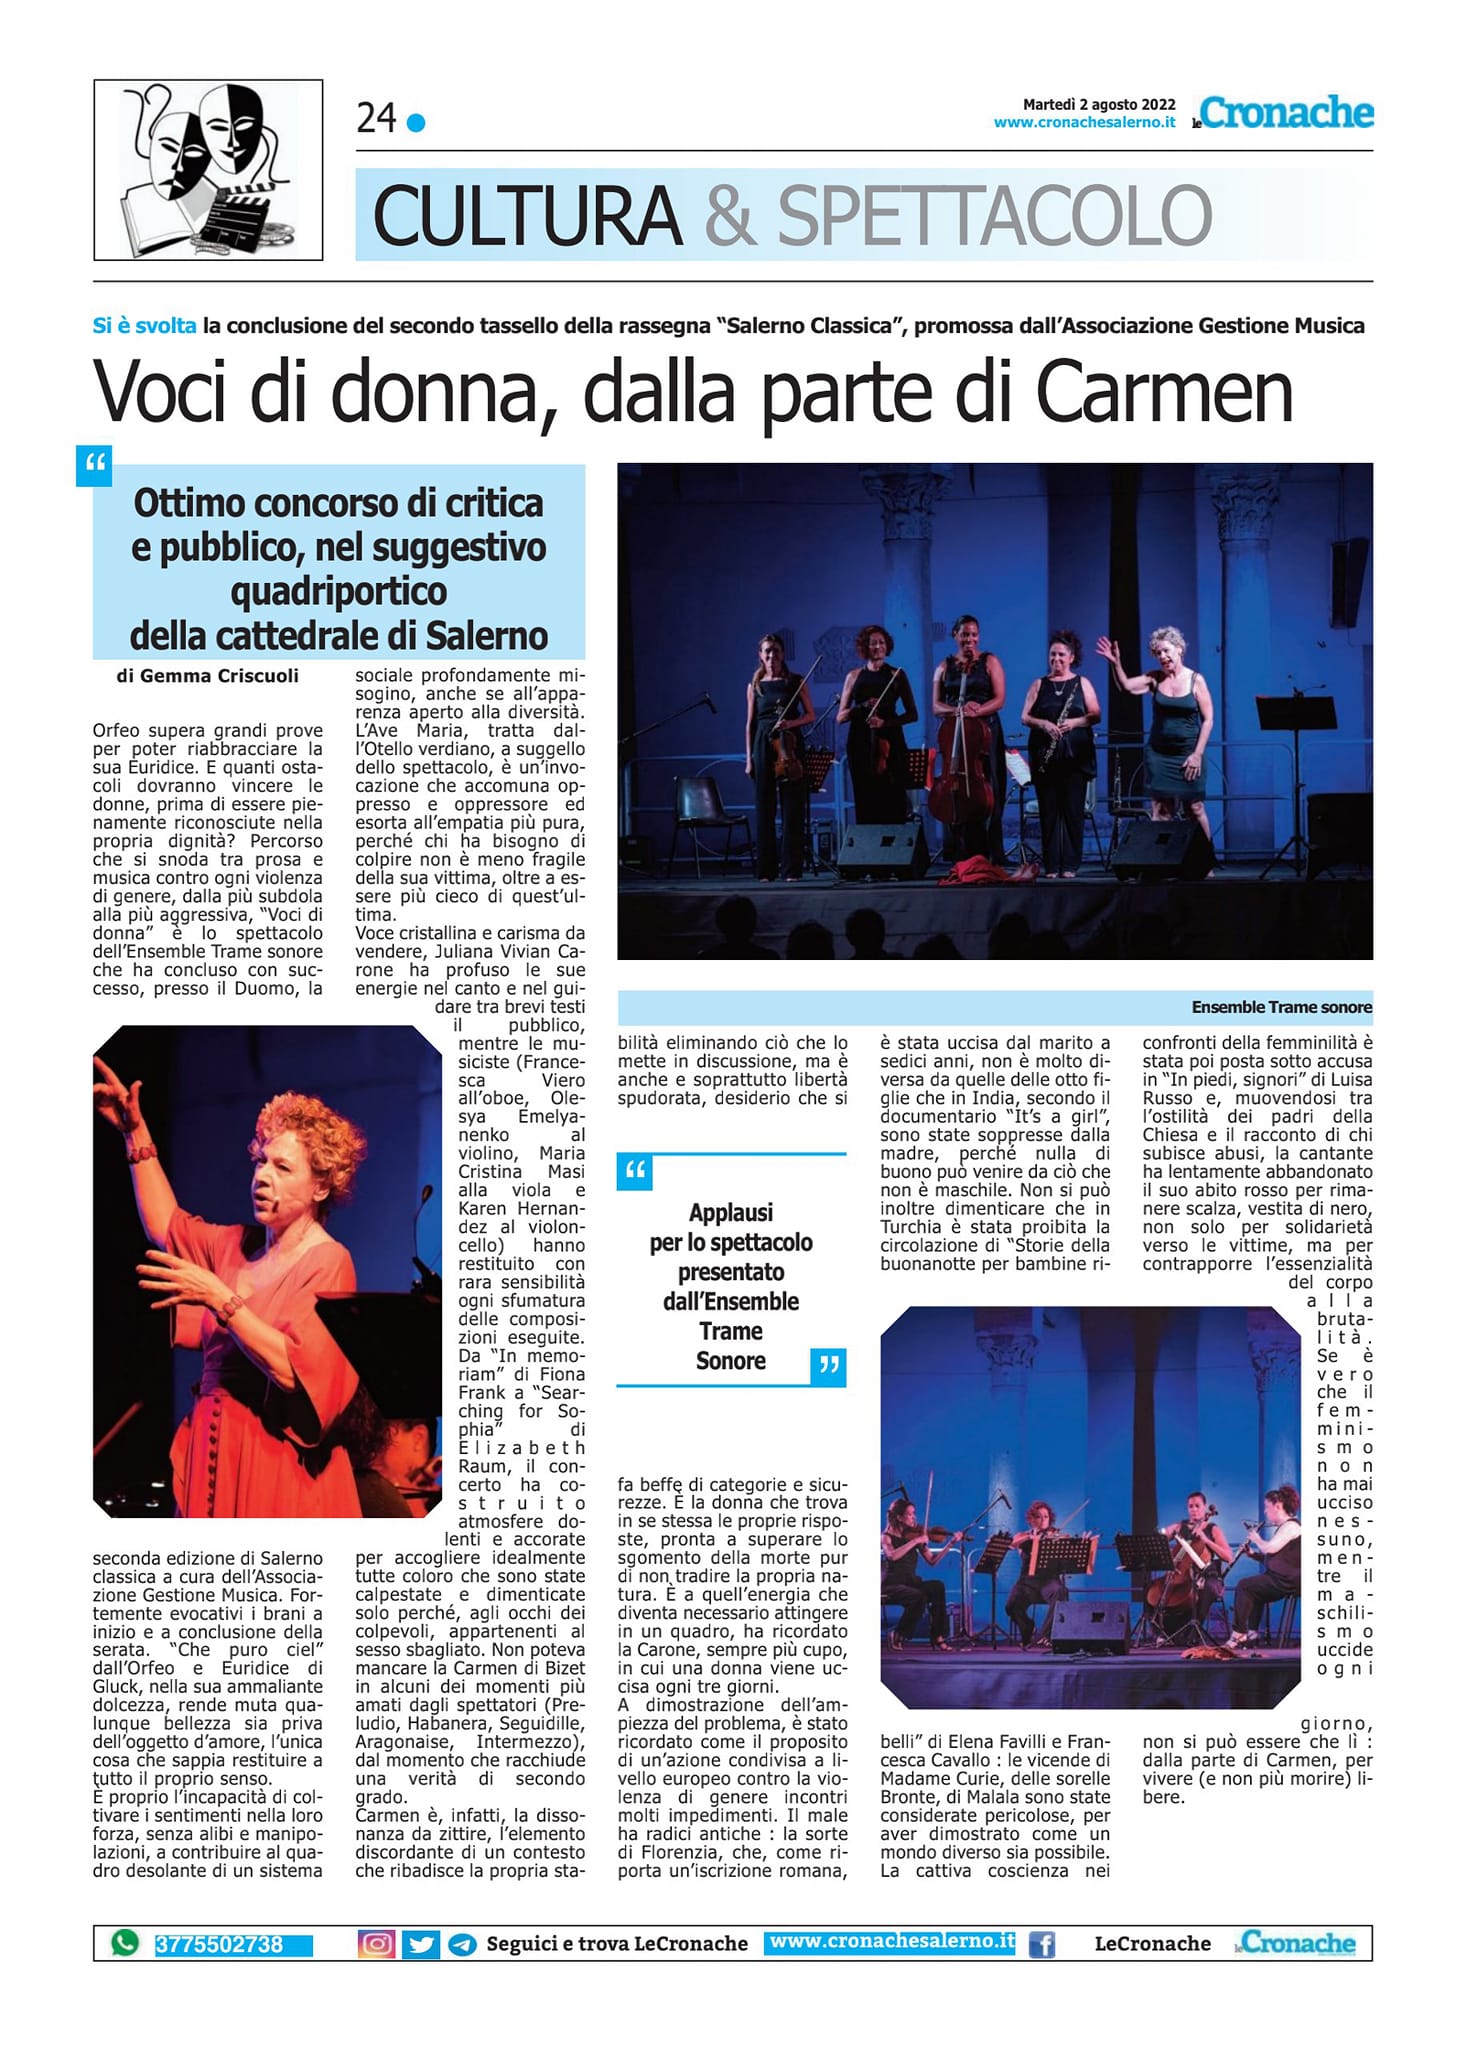 Review of concert in Salerno by Salerno Classica